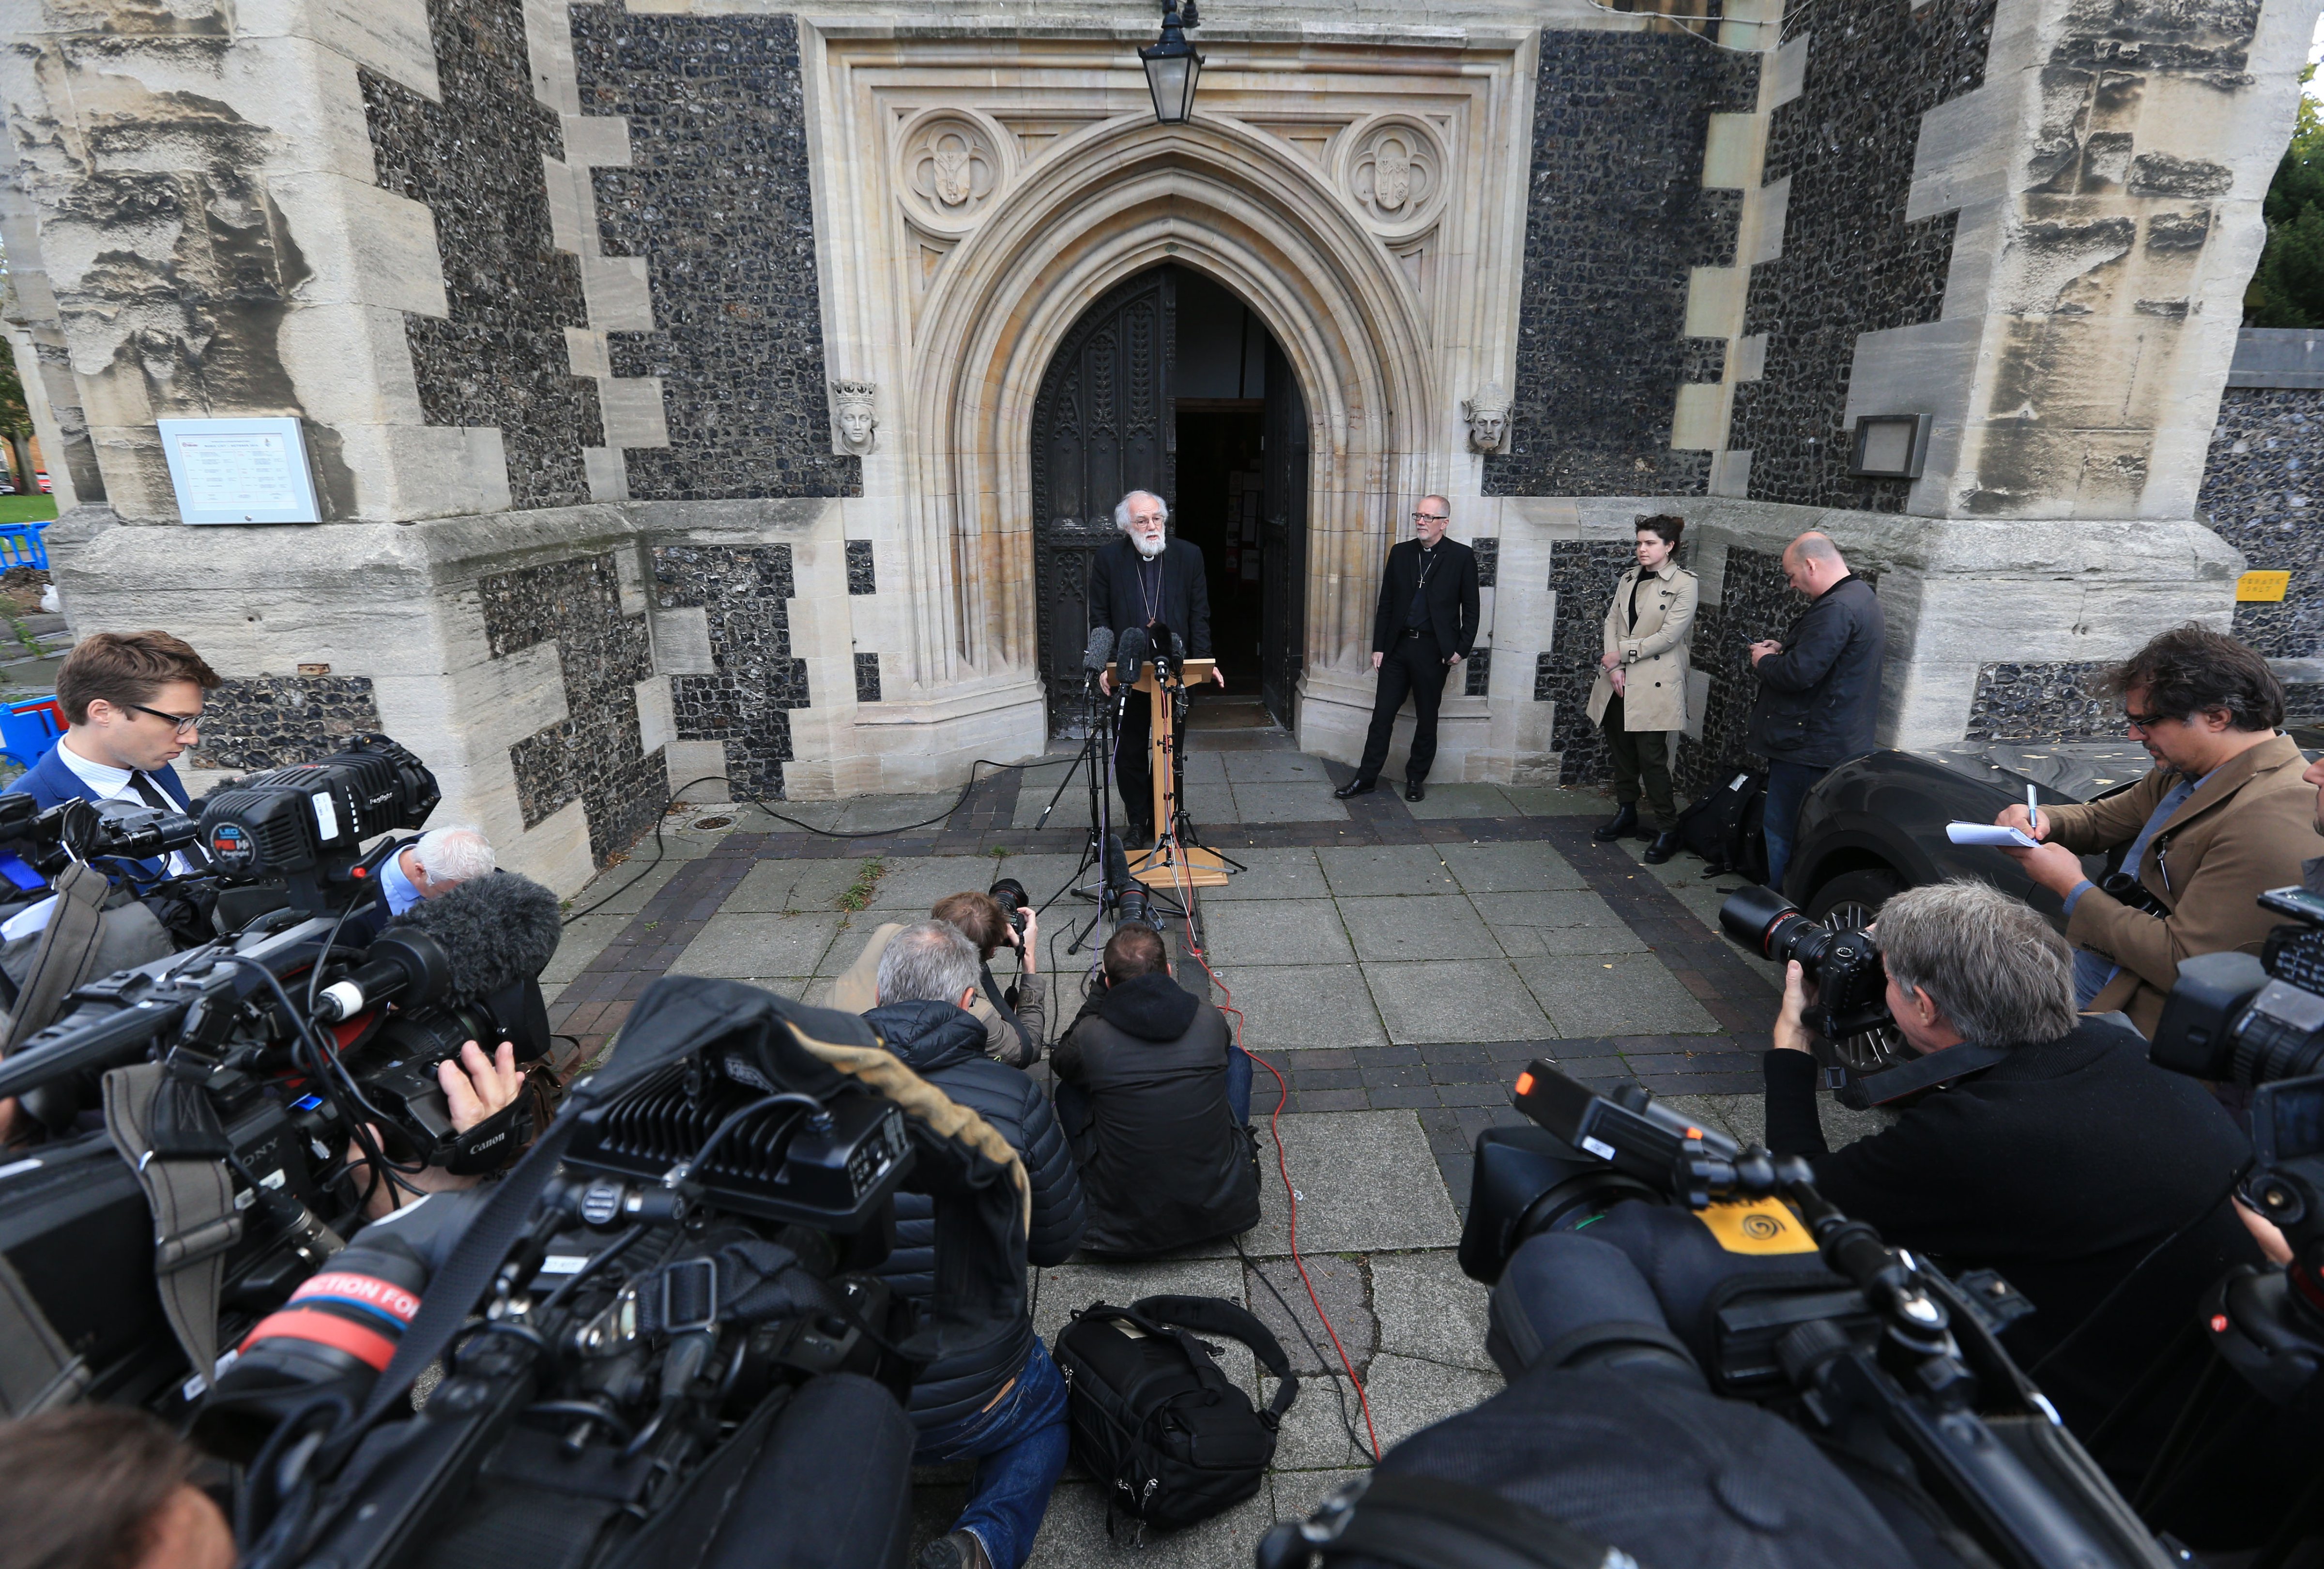 Former Archbishop of Canterbury Dr Rowan Williams speaks to reporters outside Croydon Minster, Croydon, as efforts to resettle migrant children from the Calais "Jungle" are stepped up. Picture date: Monday October 17, 2016. (Jonathan Brady—PA Wire/Press Association Images)